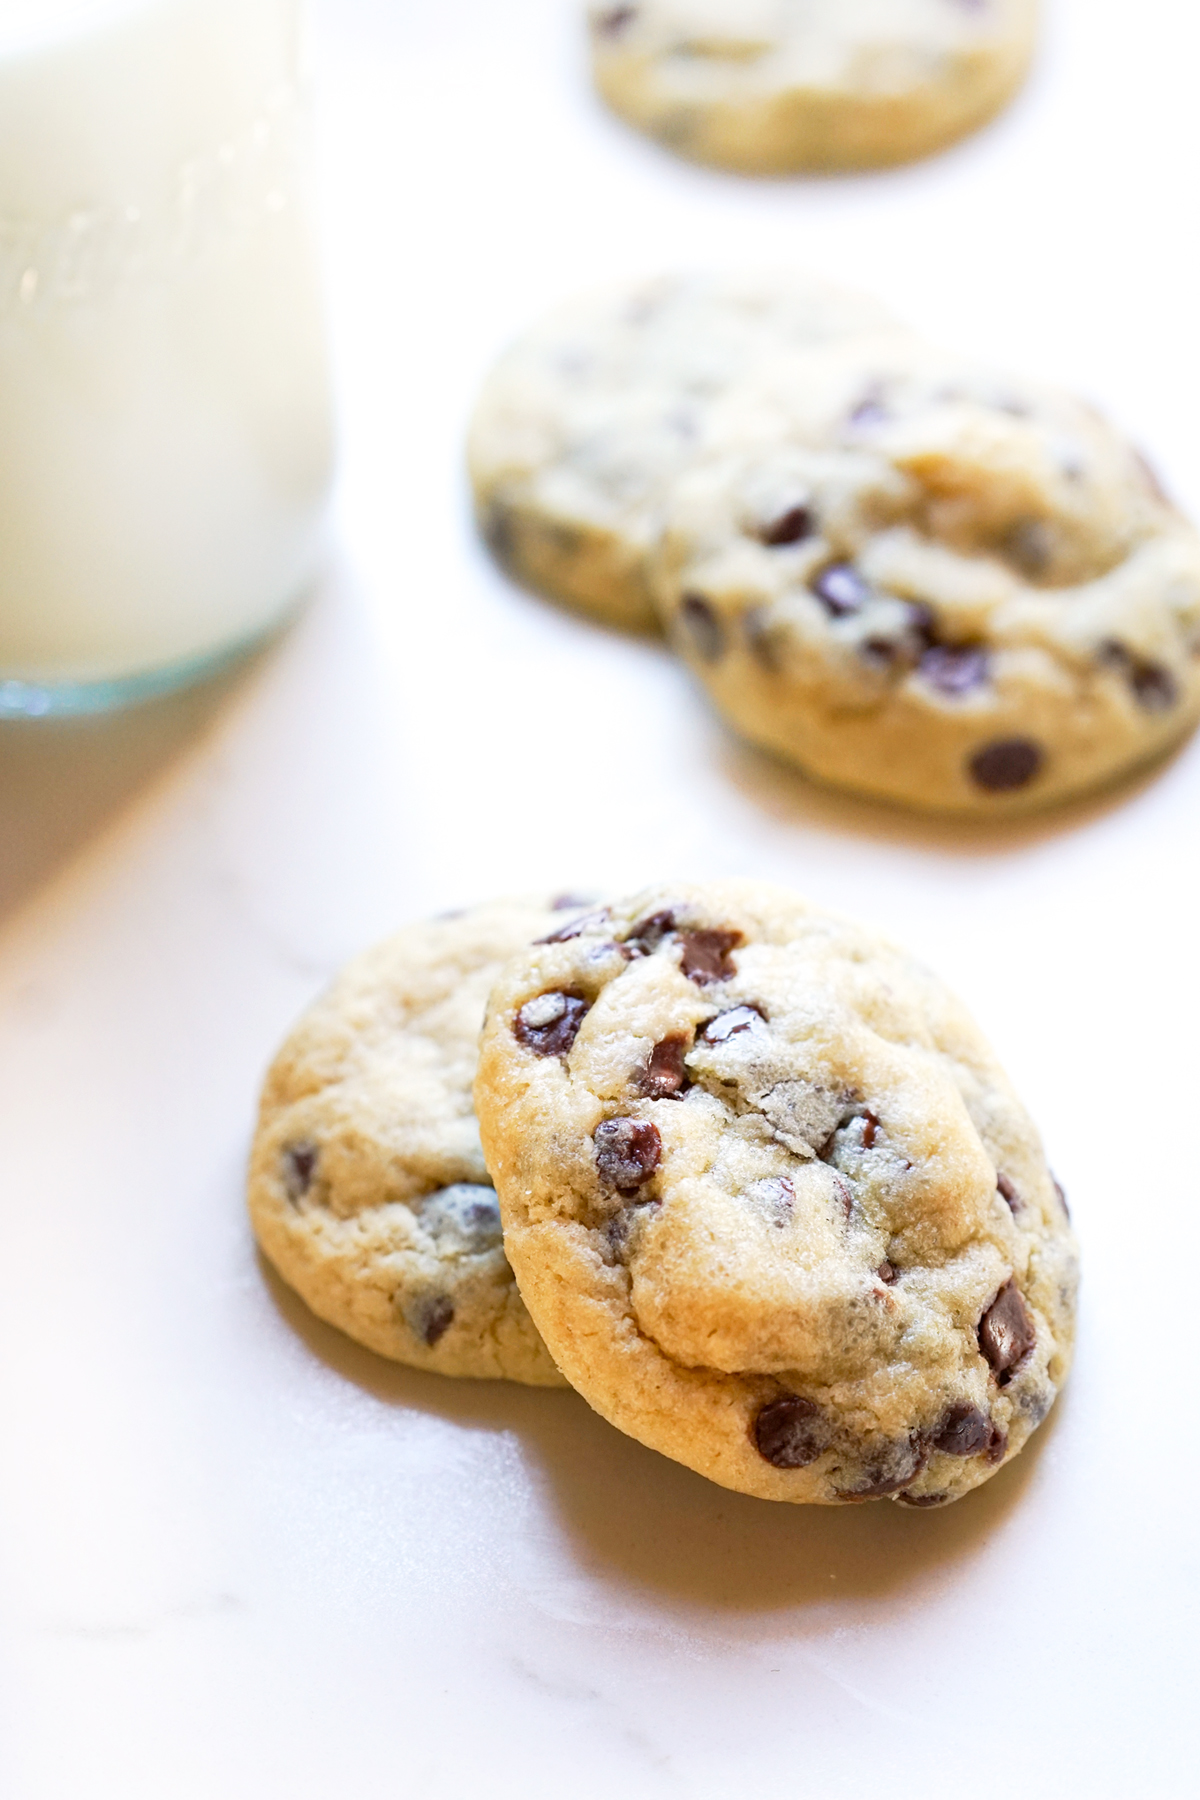 Chocolate Chip Cookies with a Glass of Milk